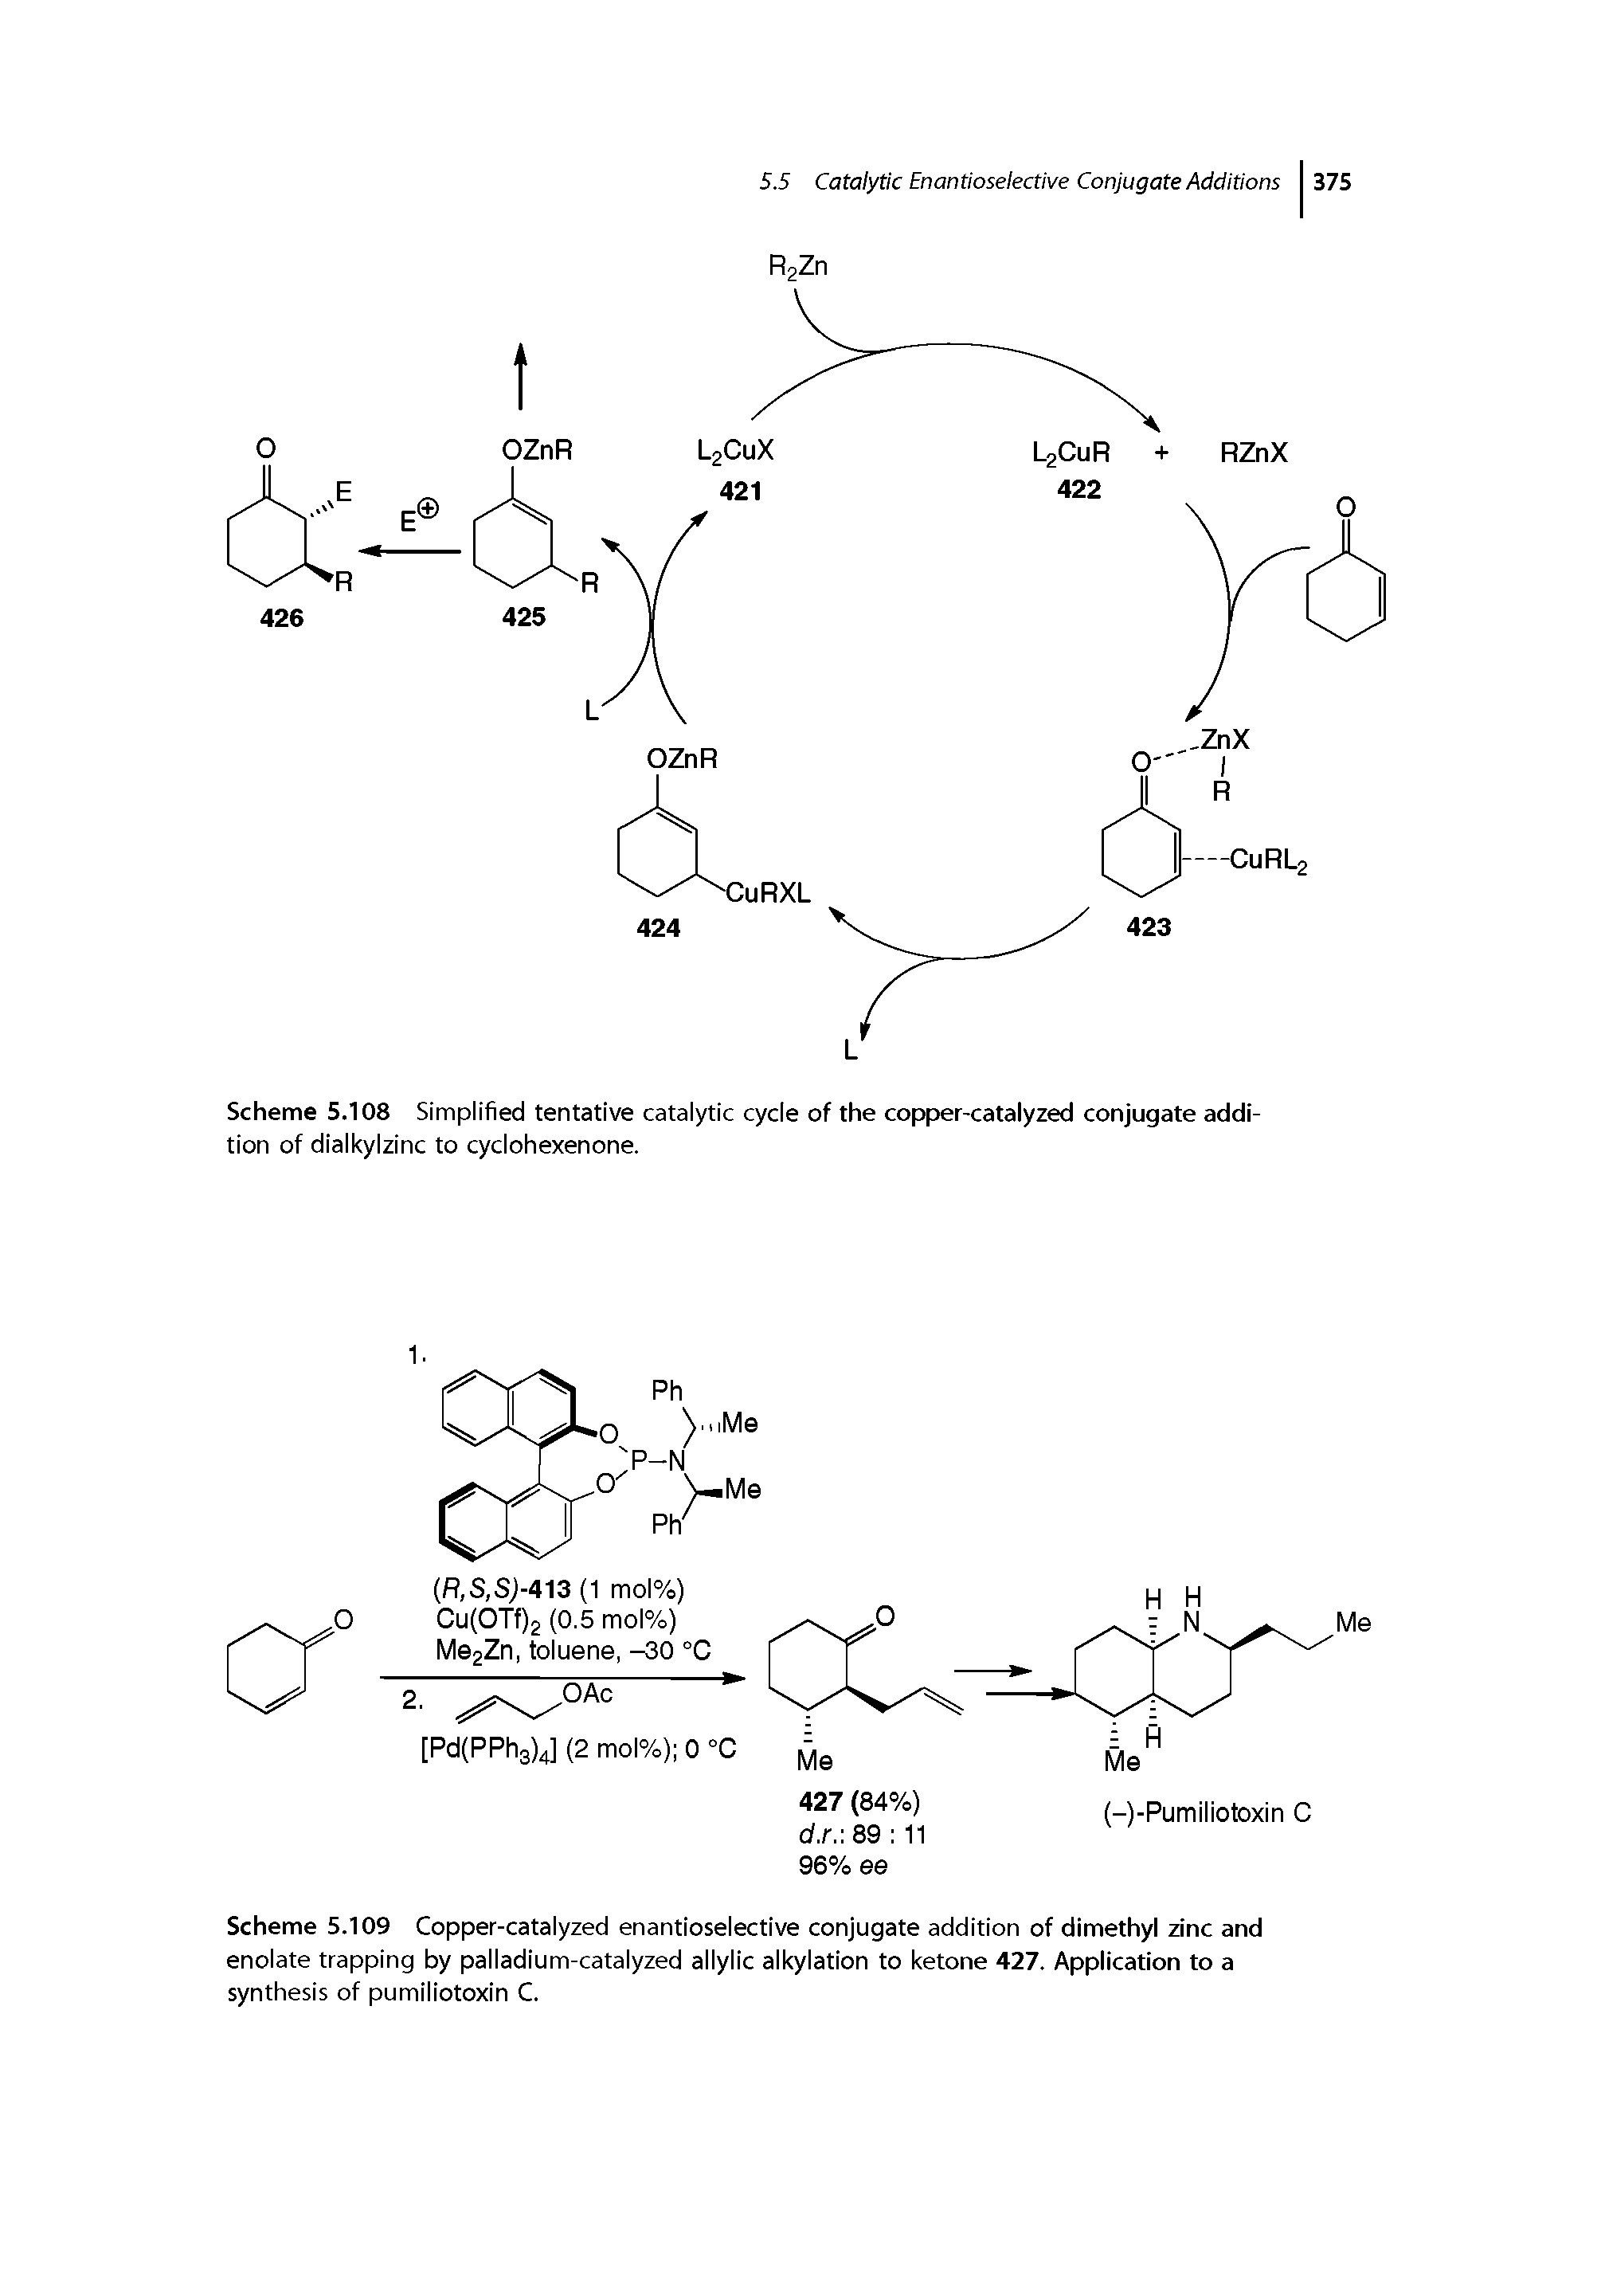 Scheme 5.108 Simplified tentative catalytic cycle of the copper-catalyzed conjugate addition of dialkylzinc to cyclohexenone.